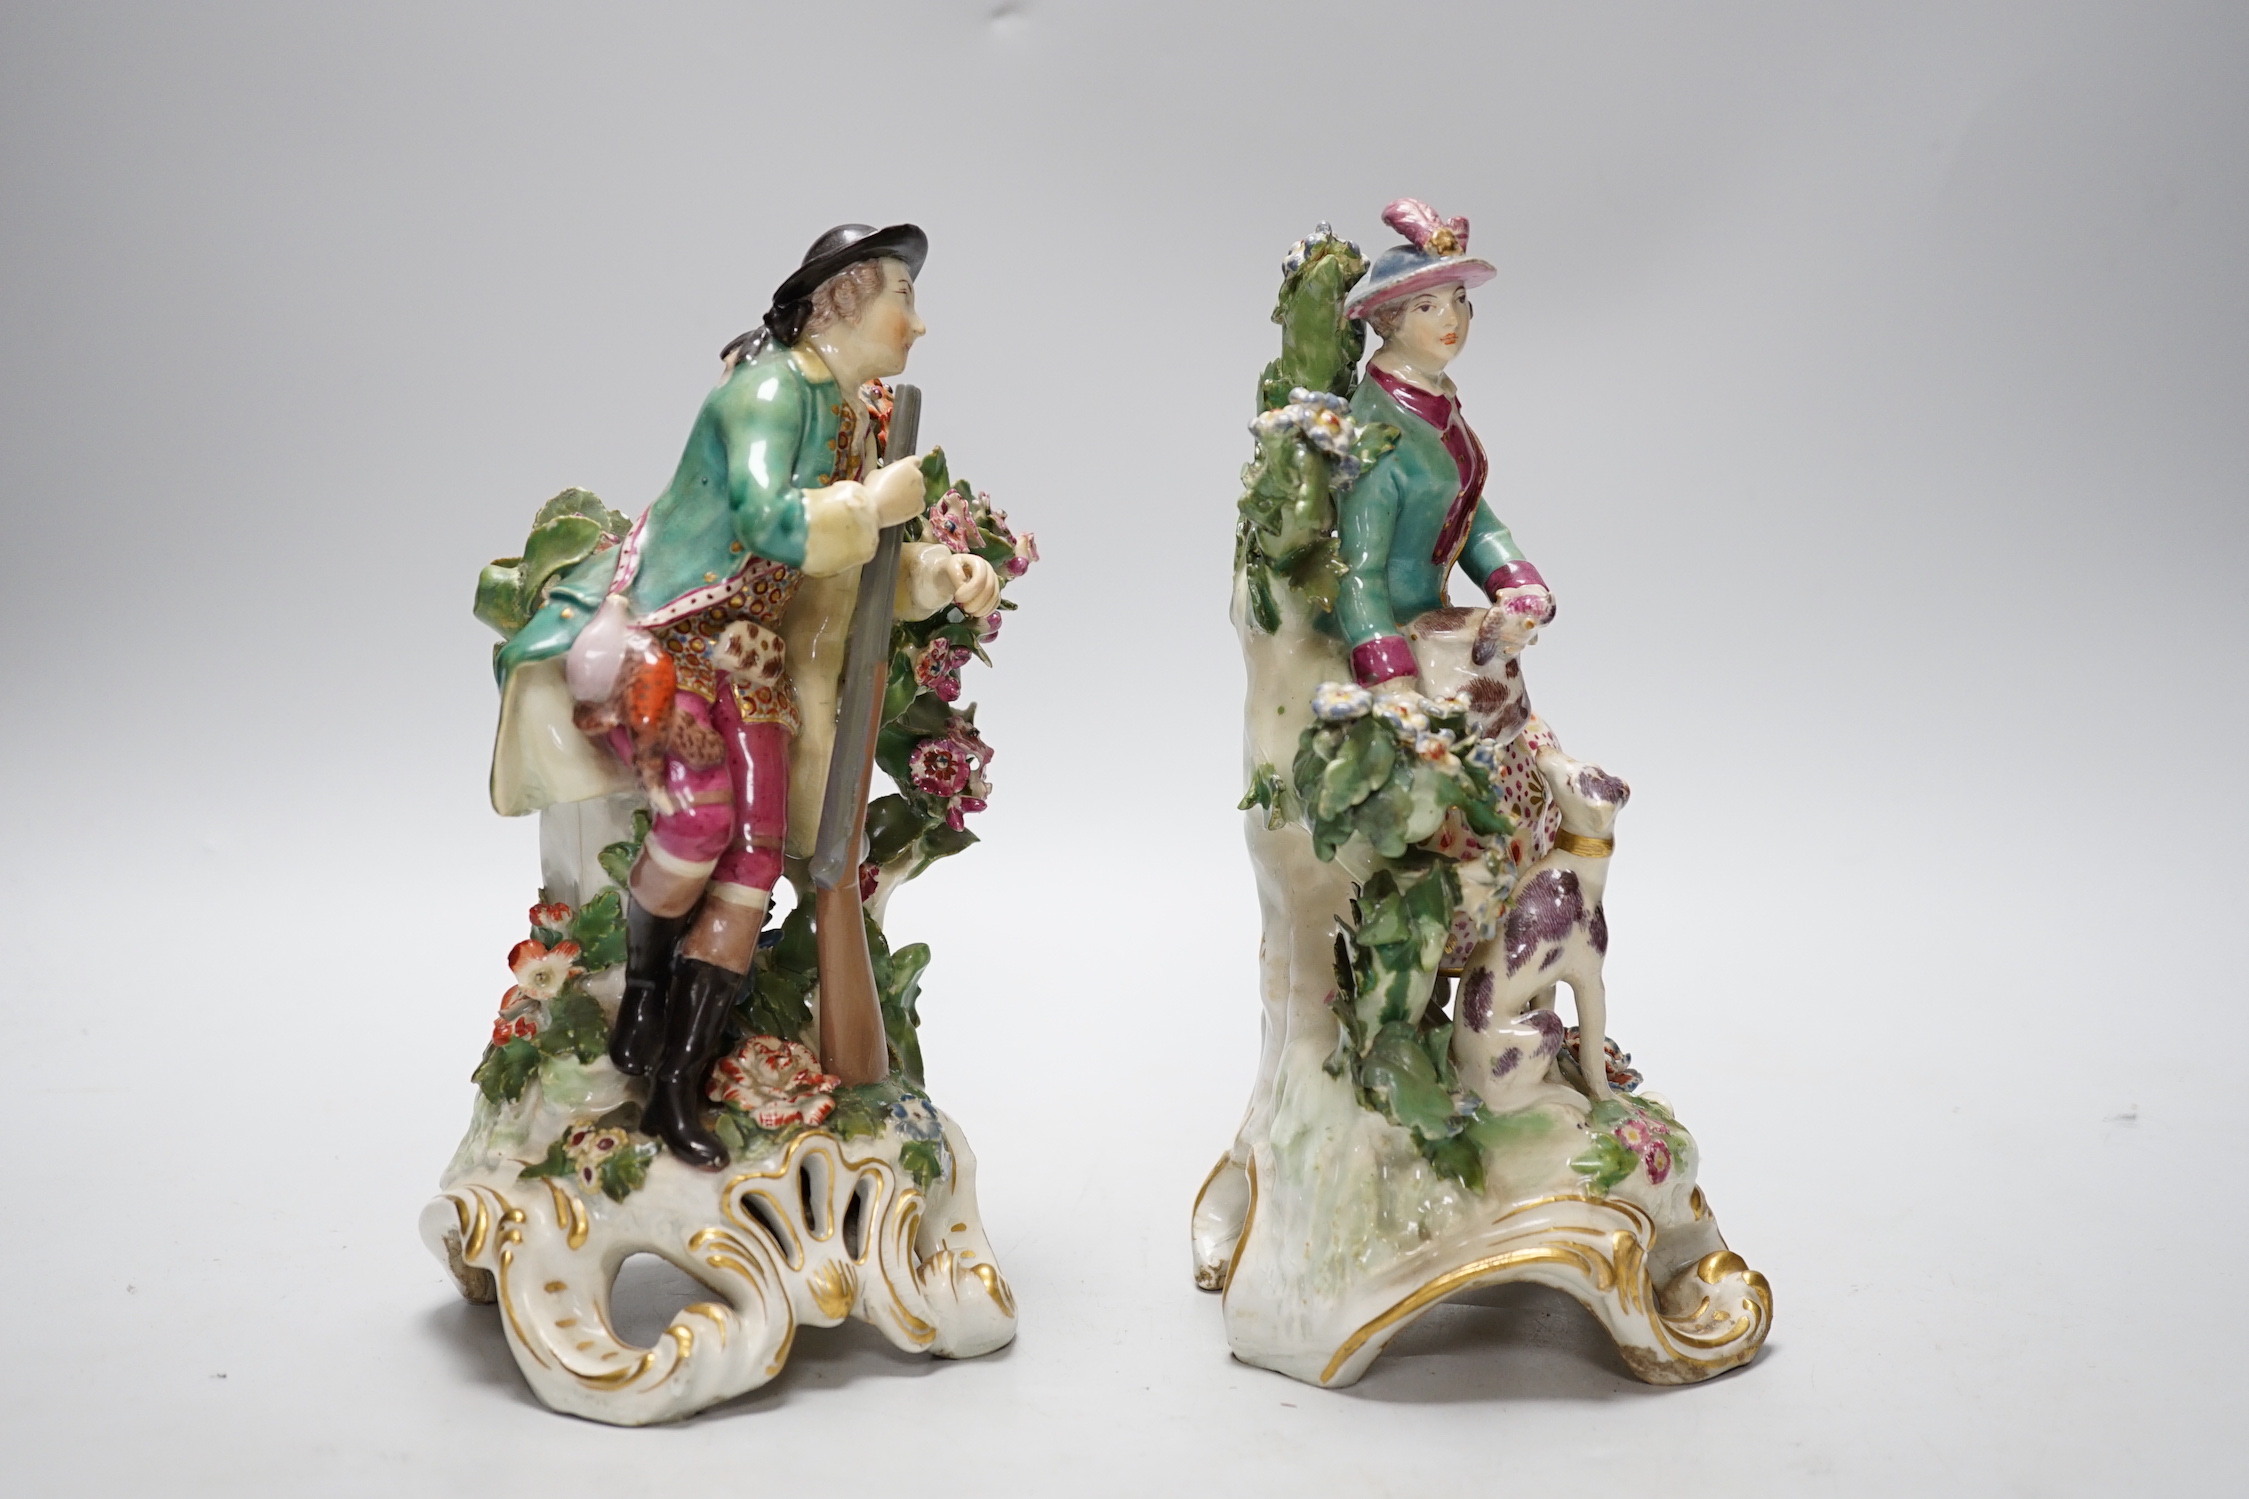 A pair of Chelsea gold anchor period figures wearing 18th century dress, c.1760-65, 22cm - Image 2 of 5